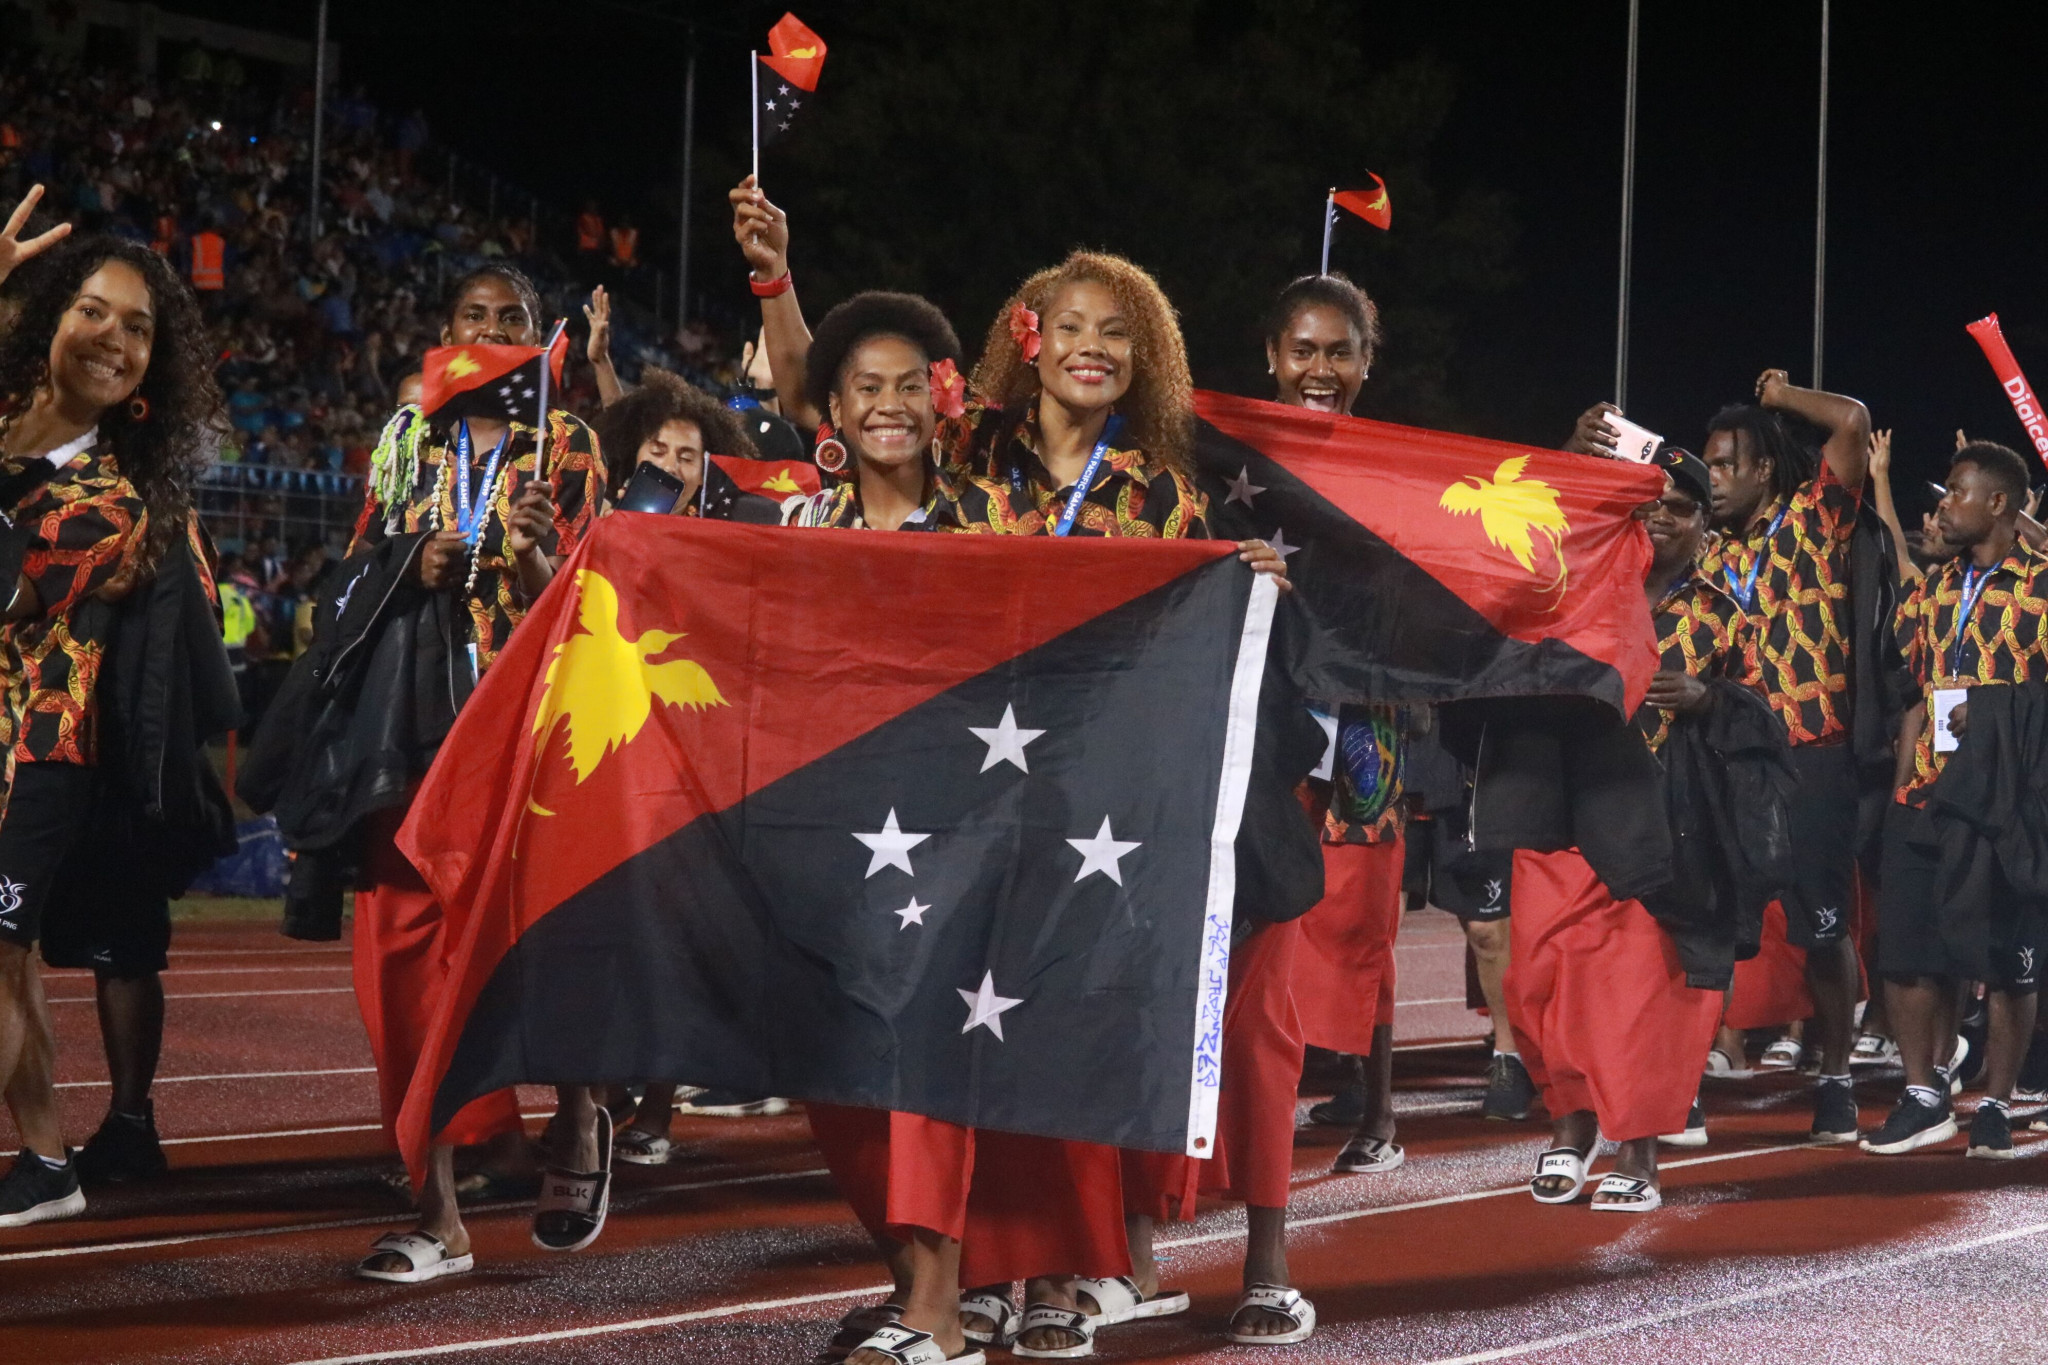 As the previous hosts, Papua New Guinea were the first team out in the Parade of Nations ©Roland Setu/Games News Service